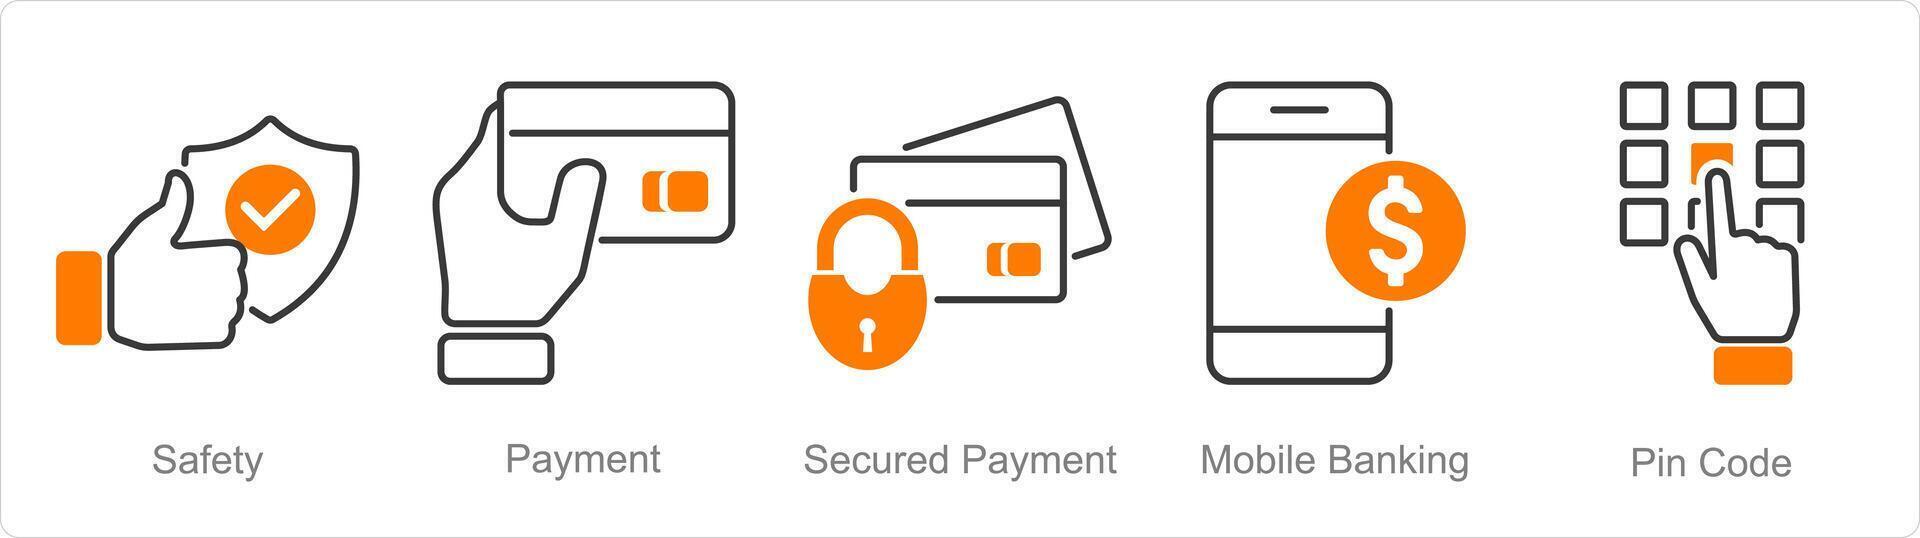 A set of 5 security icons as safety, payment, secured payment, mobile banking vector